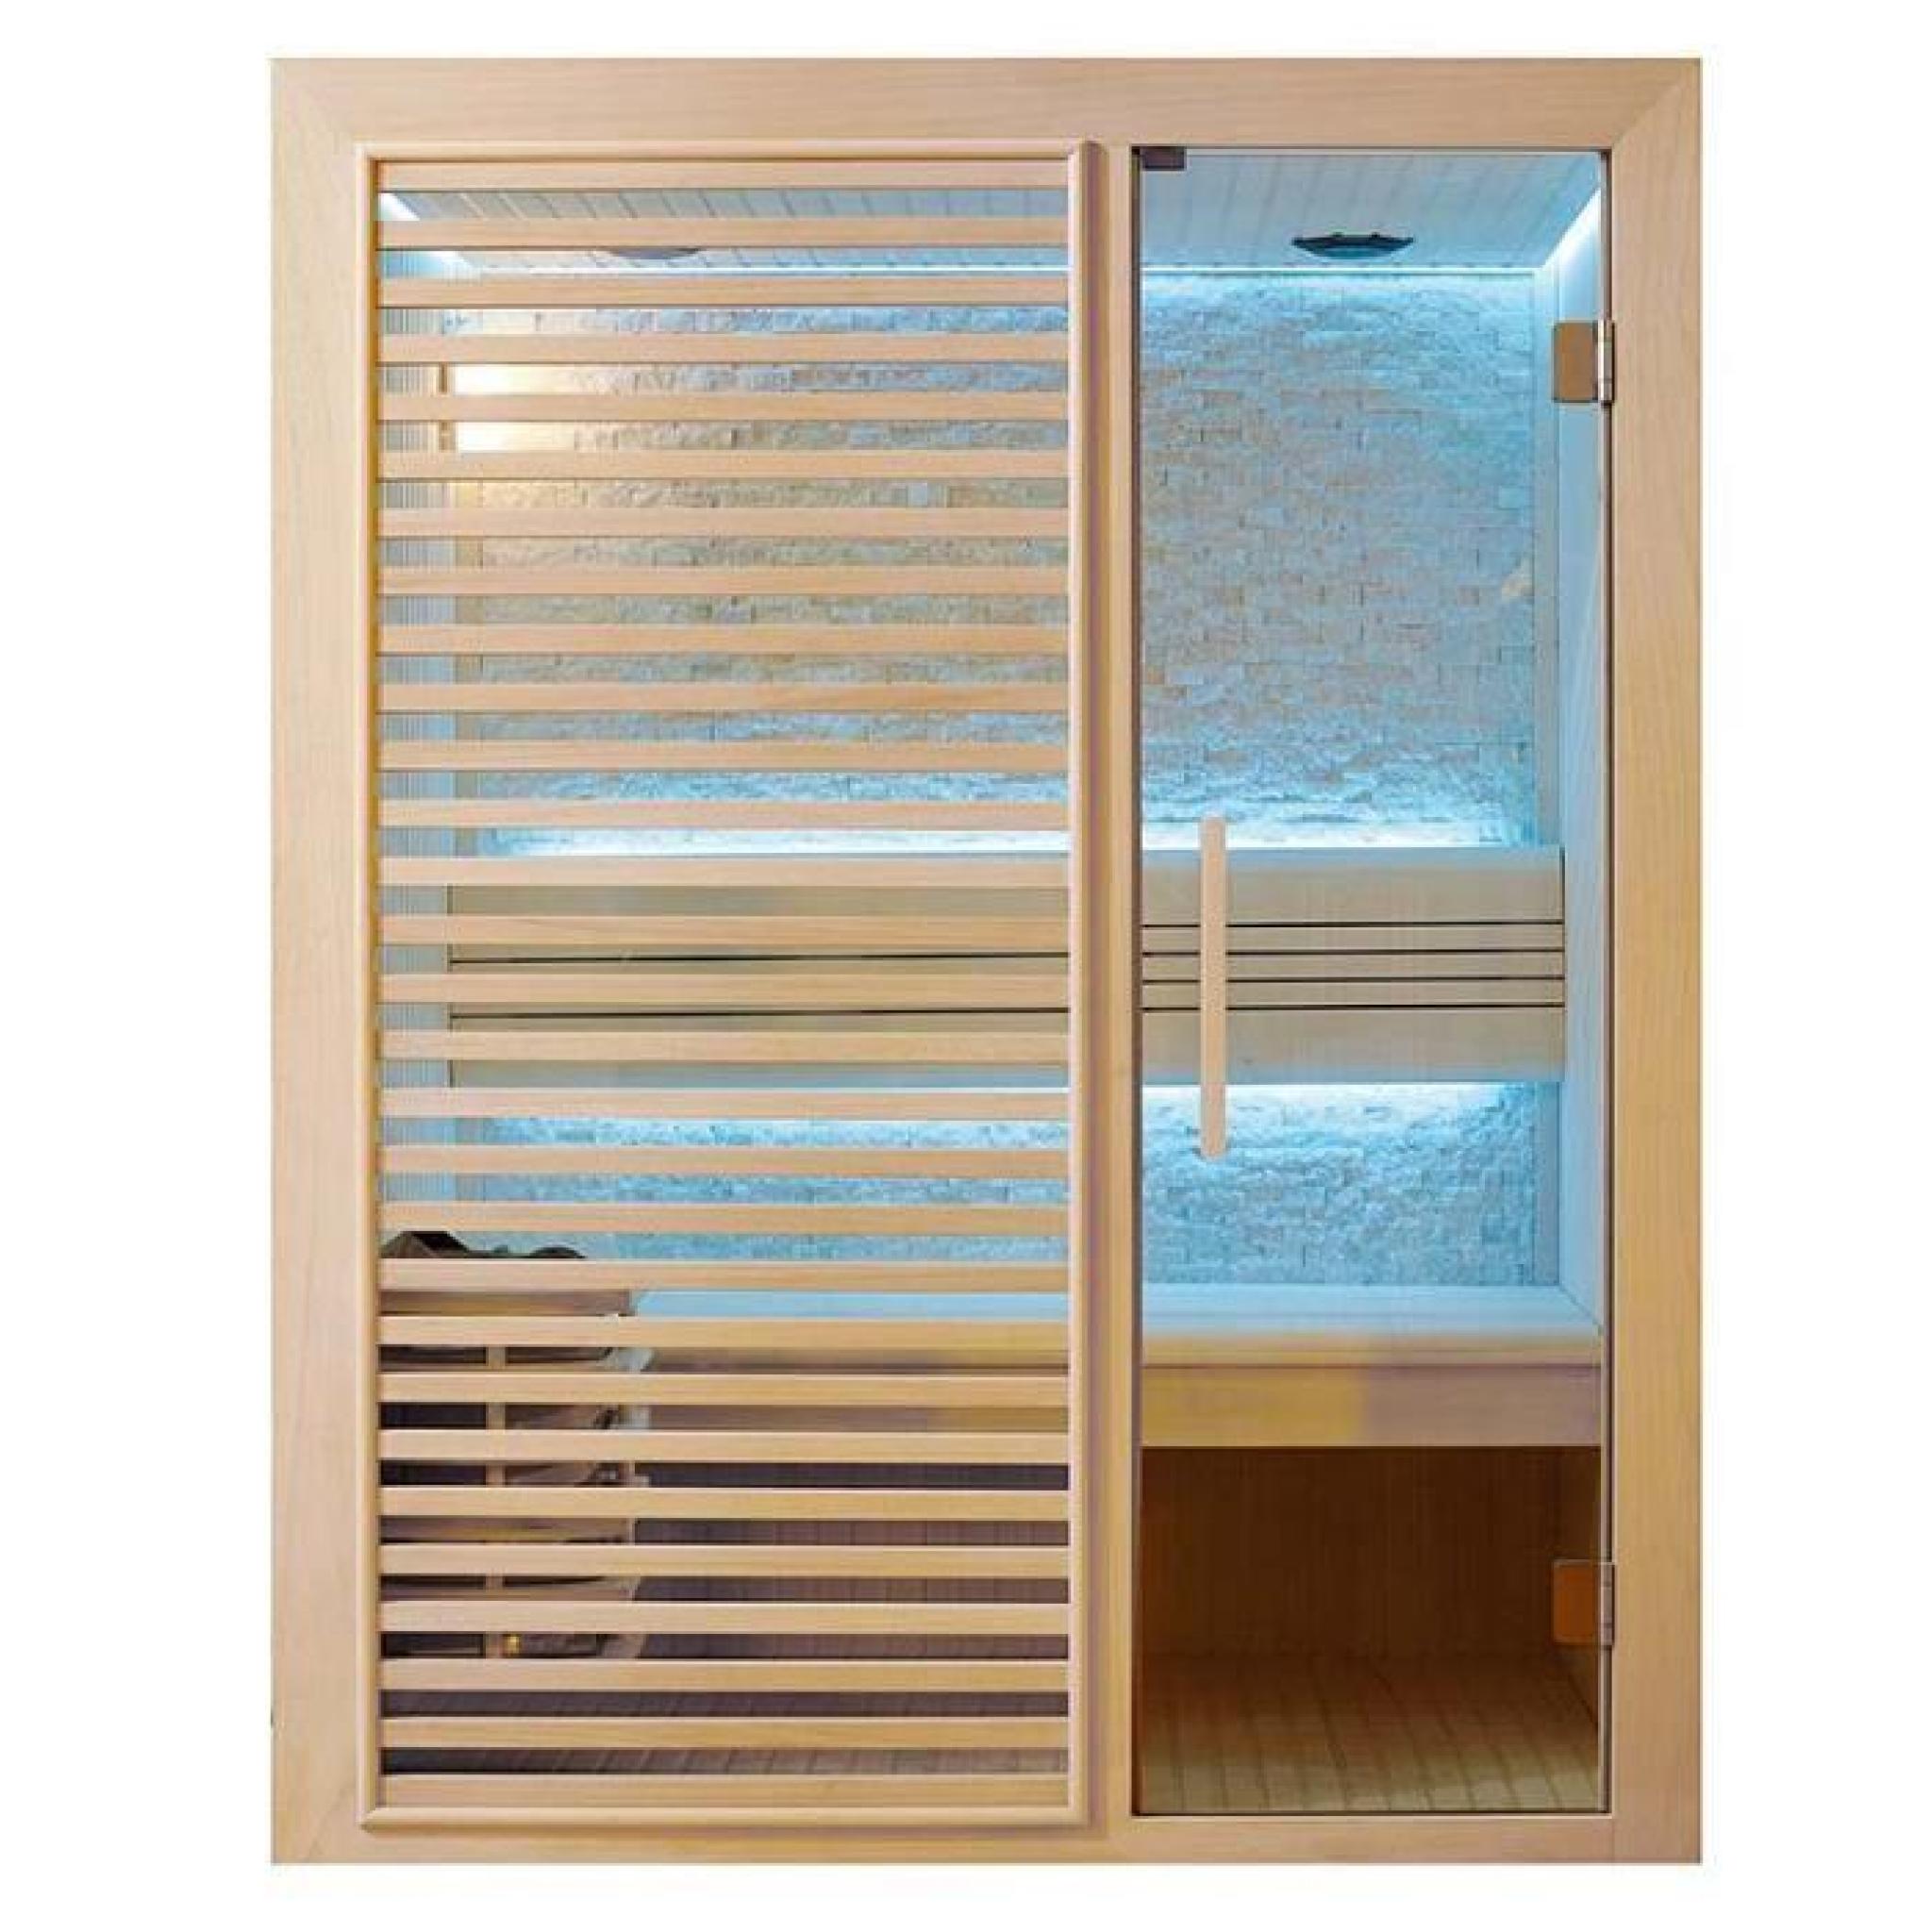 Sauna traditionnel Intimo - 100 x 105 x 190 - Cêdre rouge